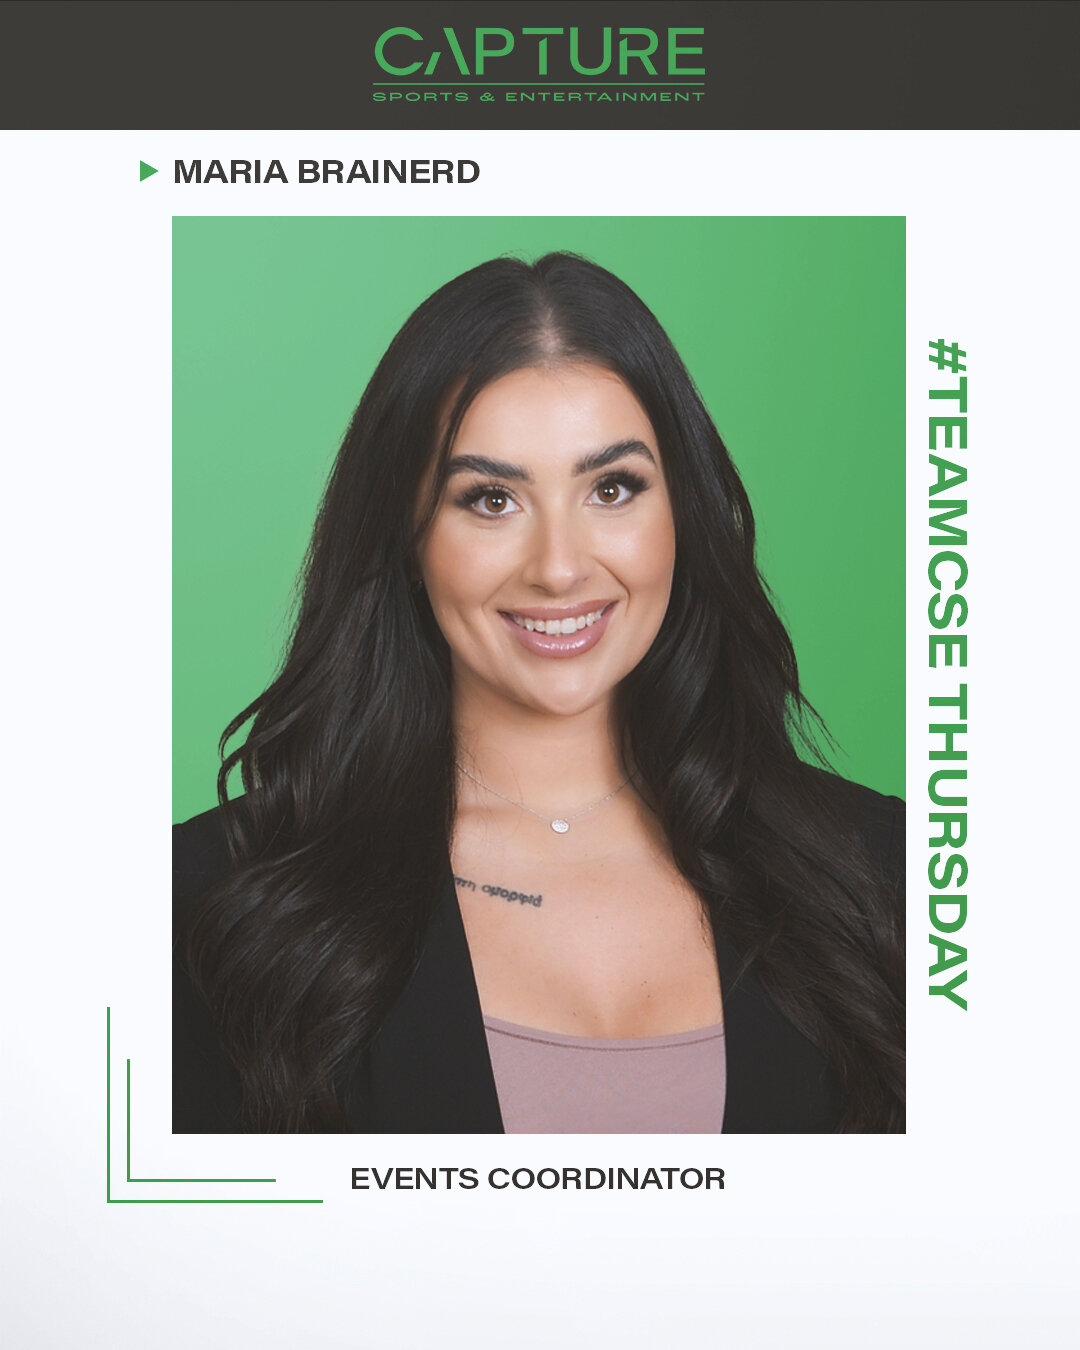 Meet Maria, an Events Coordinator at Capture! As a lifelong athlete, she is very passionate about helping athletes make a positive impact on the communities they serve by making their events come to life. 💚

When Maria isn't working, she finds a way